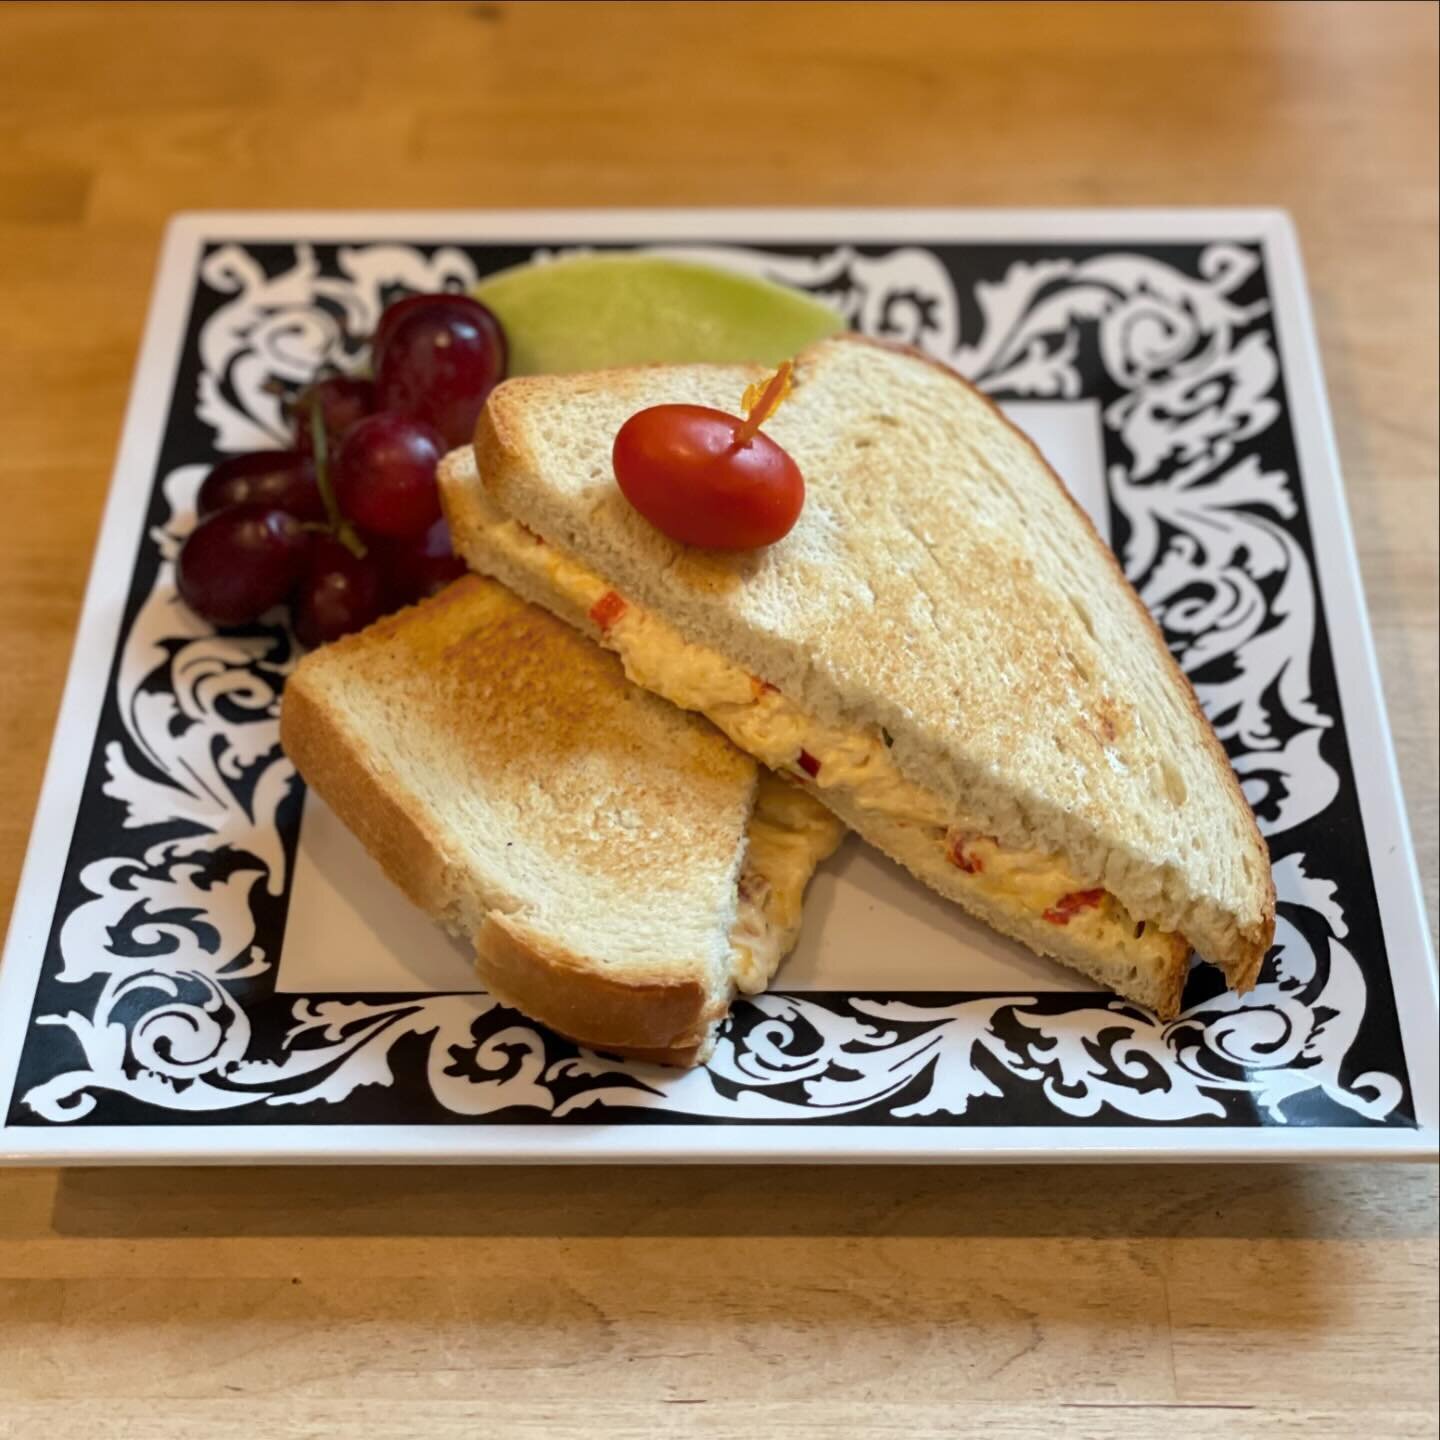 NEW lunch menu items for spring! 

🥪 Smoked Pimento Cheese Sandwich
🥗 Chicken Balsamic Caprese Salad

Yummy! Join us for lunch this weekend! Open 8am-11am for breakfast and 11am-3pm for lunch Friday and Saturday!